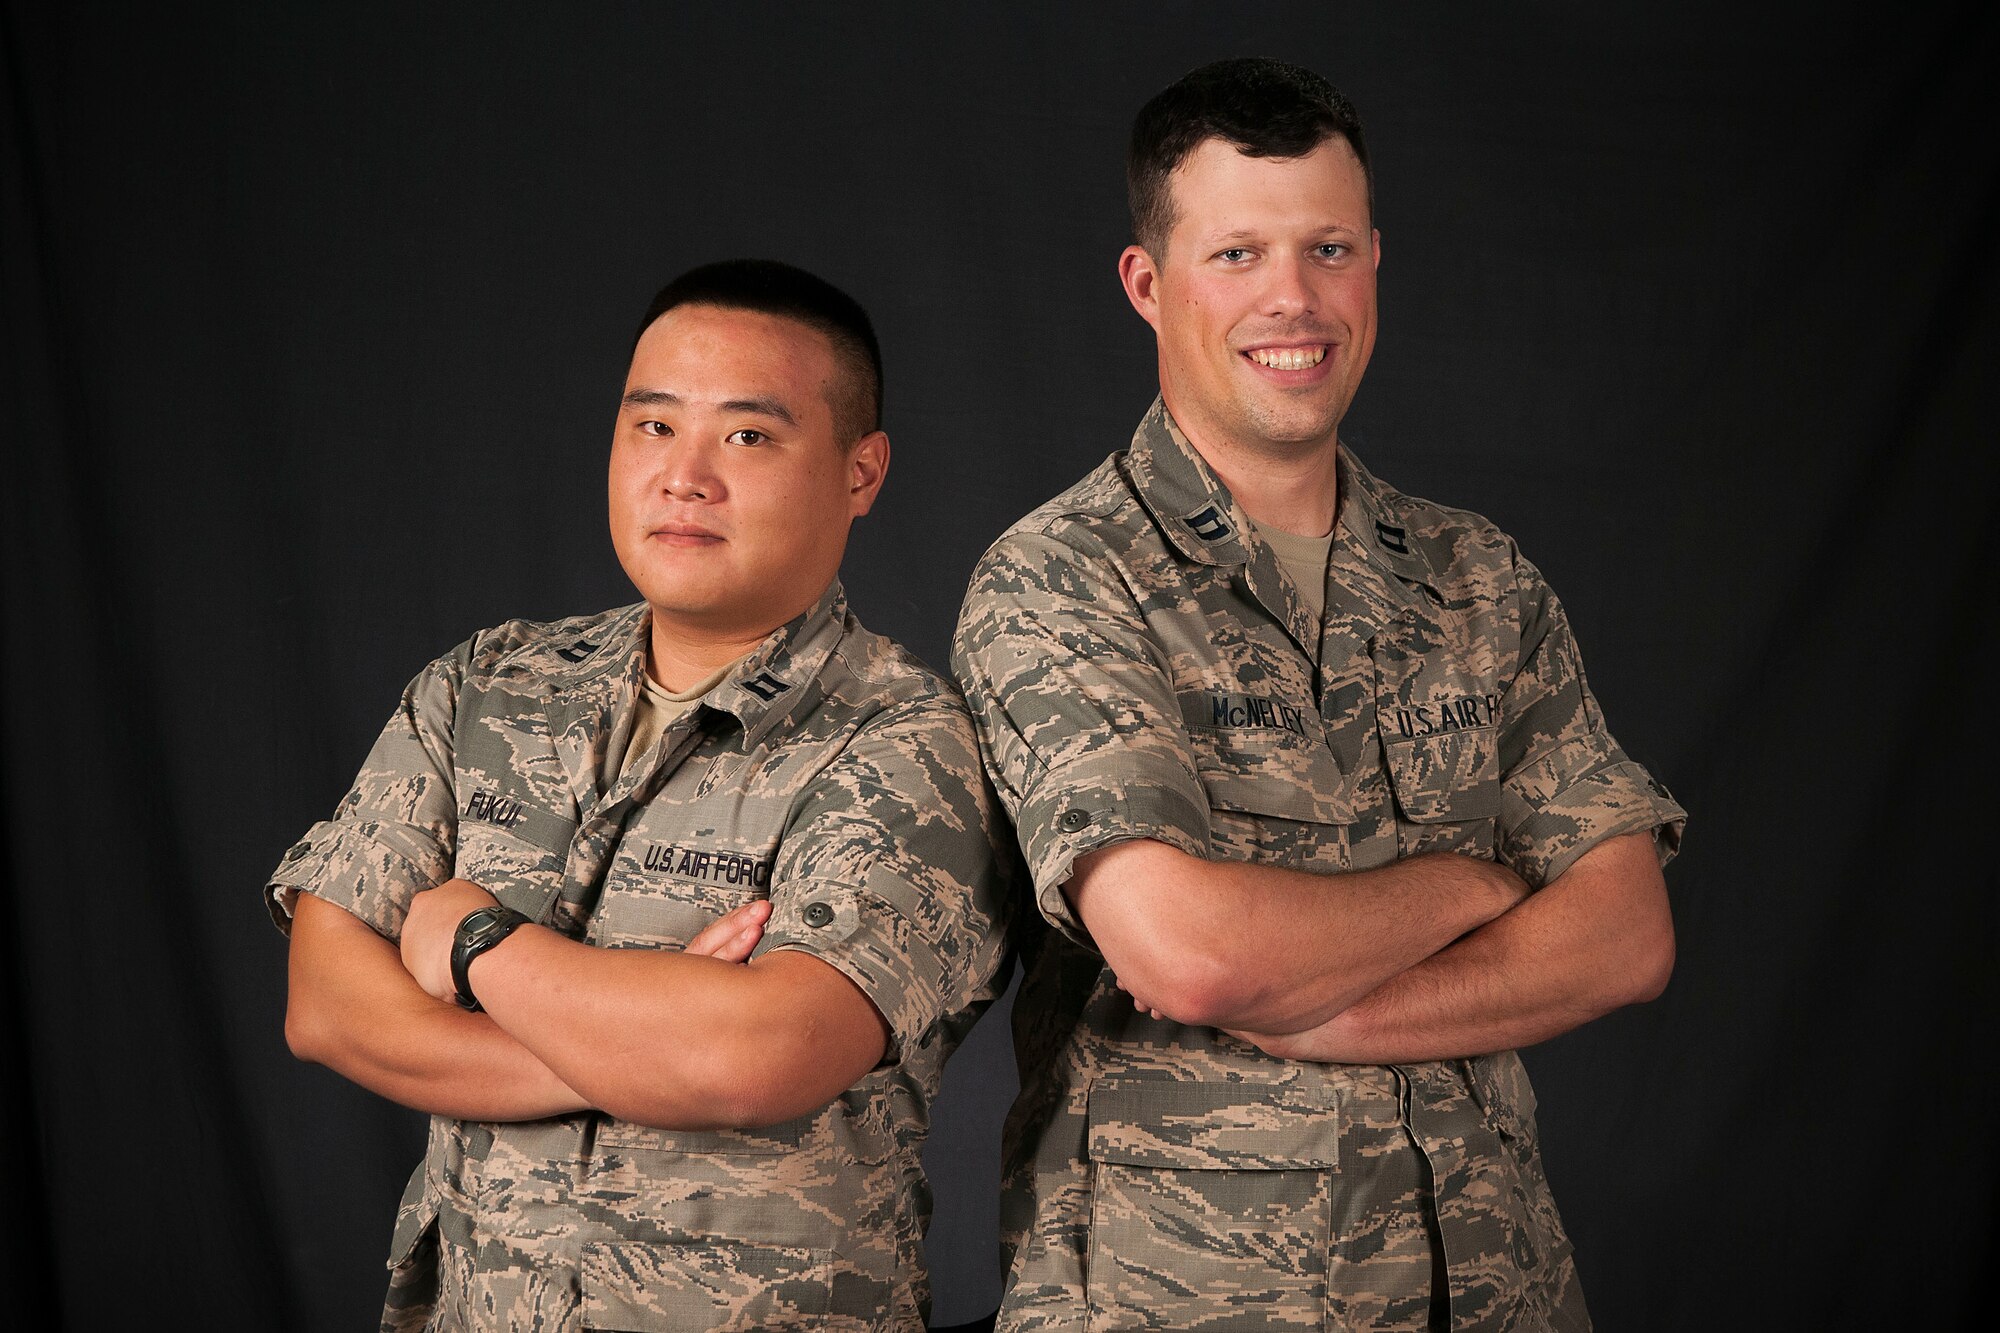 Christopher Fukui and Joshua McNelley are U.S. Air Force captains from the 18th Logistics Readiness Squadron at Kadena Air Base, Japan. Both Airmen are descendants of Sailors who fought in the Battle of Midway in World War II. Fukui’s great-grandfather, Chisato Morita, commanded the Imperial Japanese Navy Midway Flying Corps aboard the aircraft carrier Akagi and McNelley’s grandfather, Ray Sorton, a U.S. Navy Sailor, manned an anti-aircraft gun during the battle. (U.S. Air Force photo by Senior Airman John Linzmeier) 